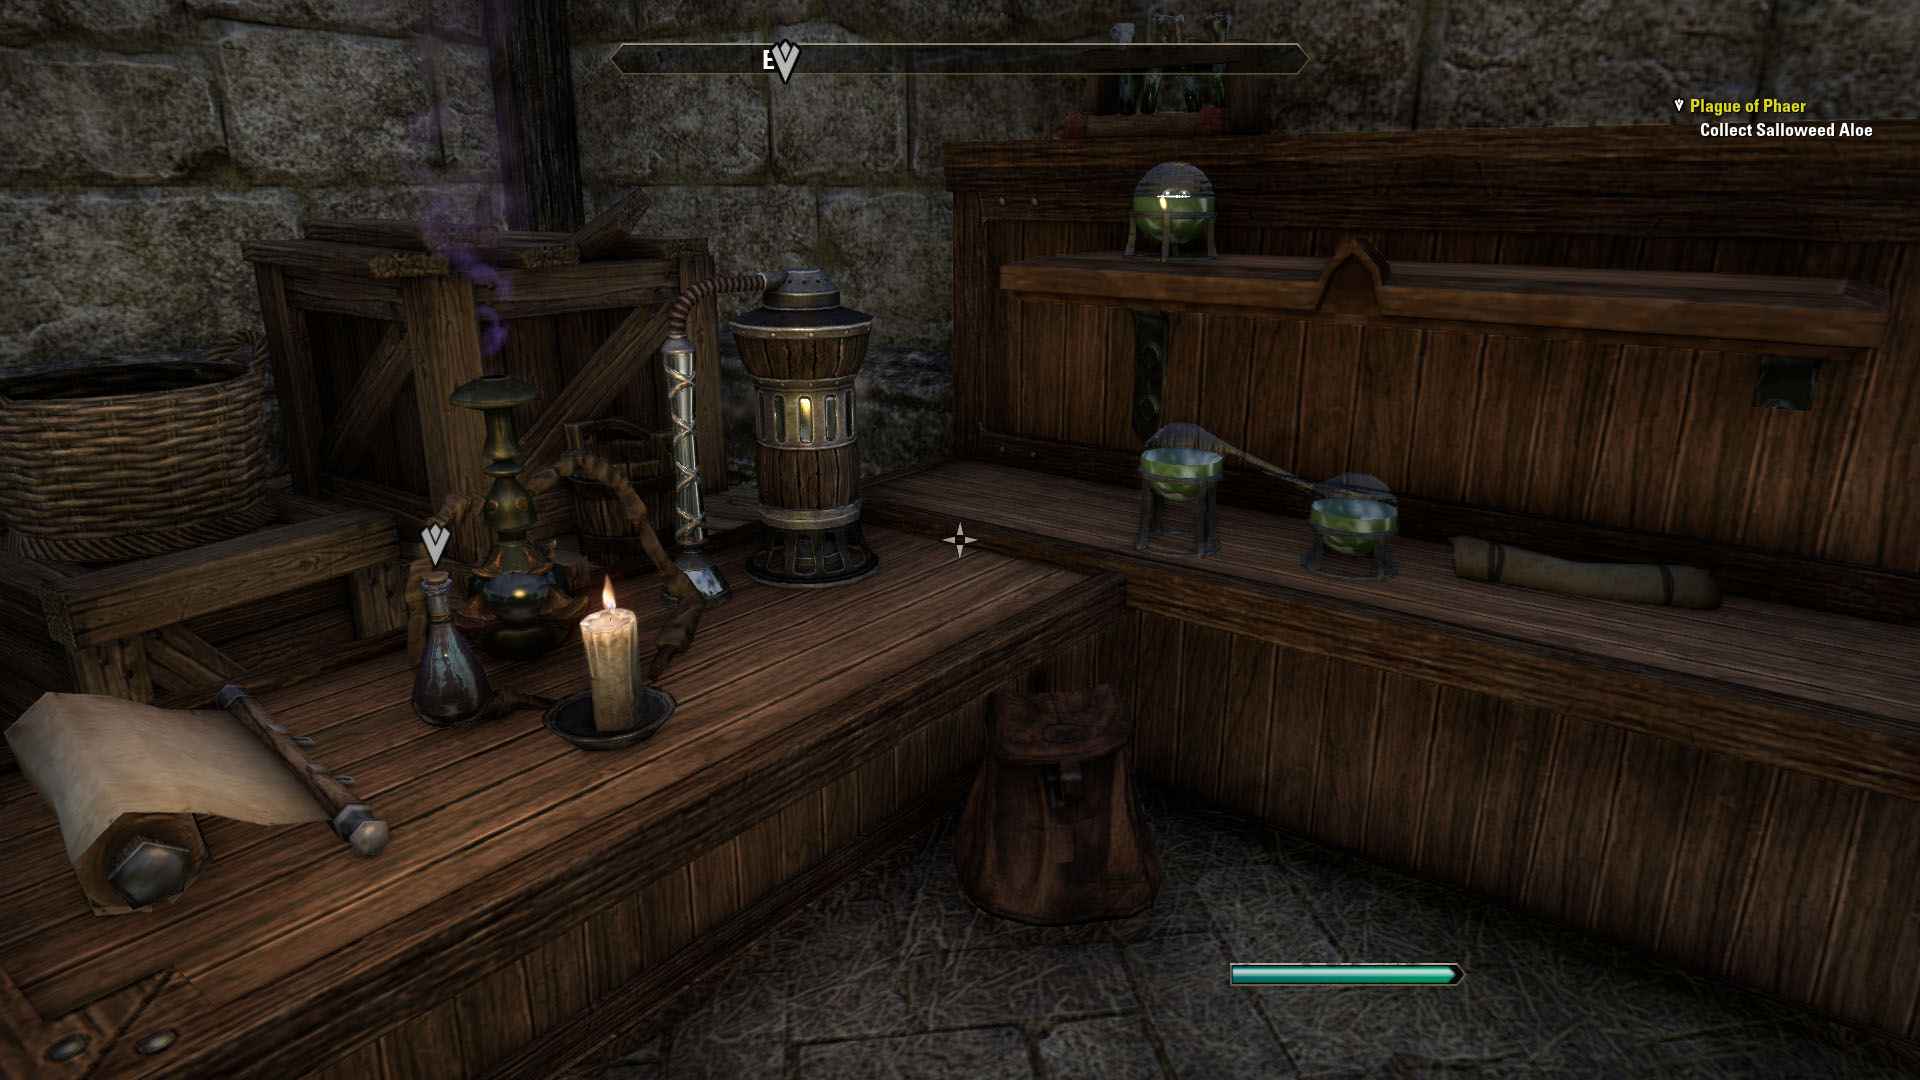 Crafting and alchemy work much like they do in Skyrim